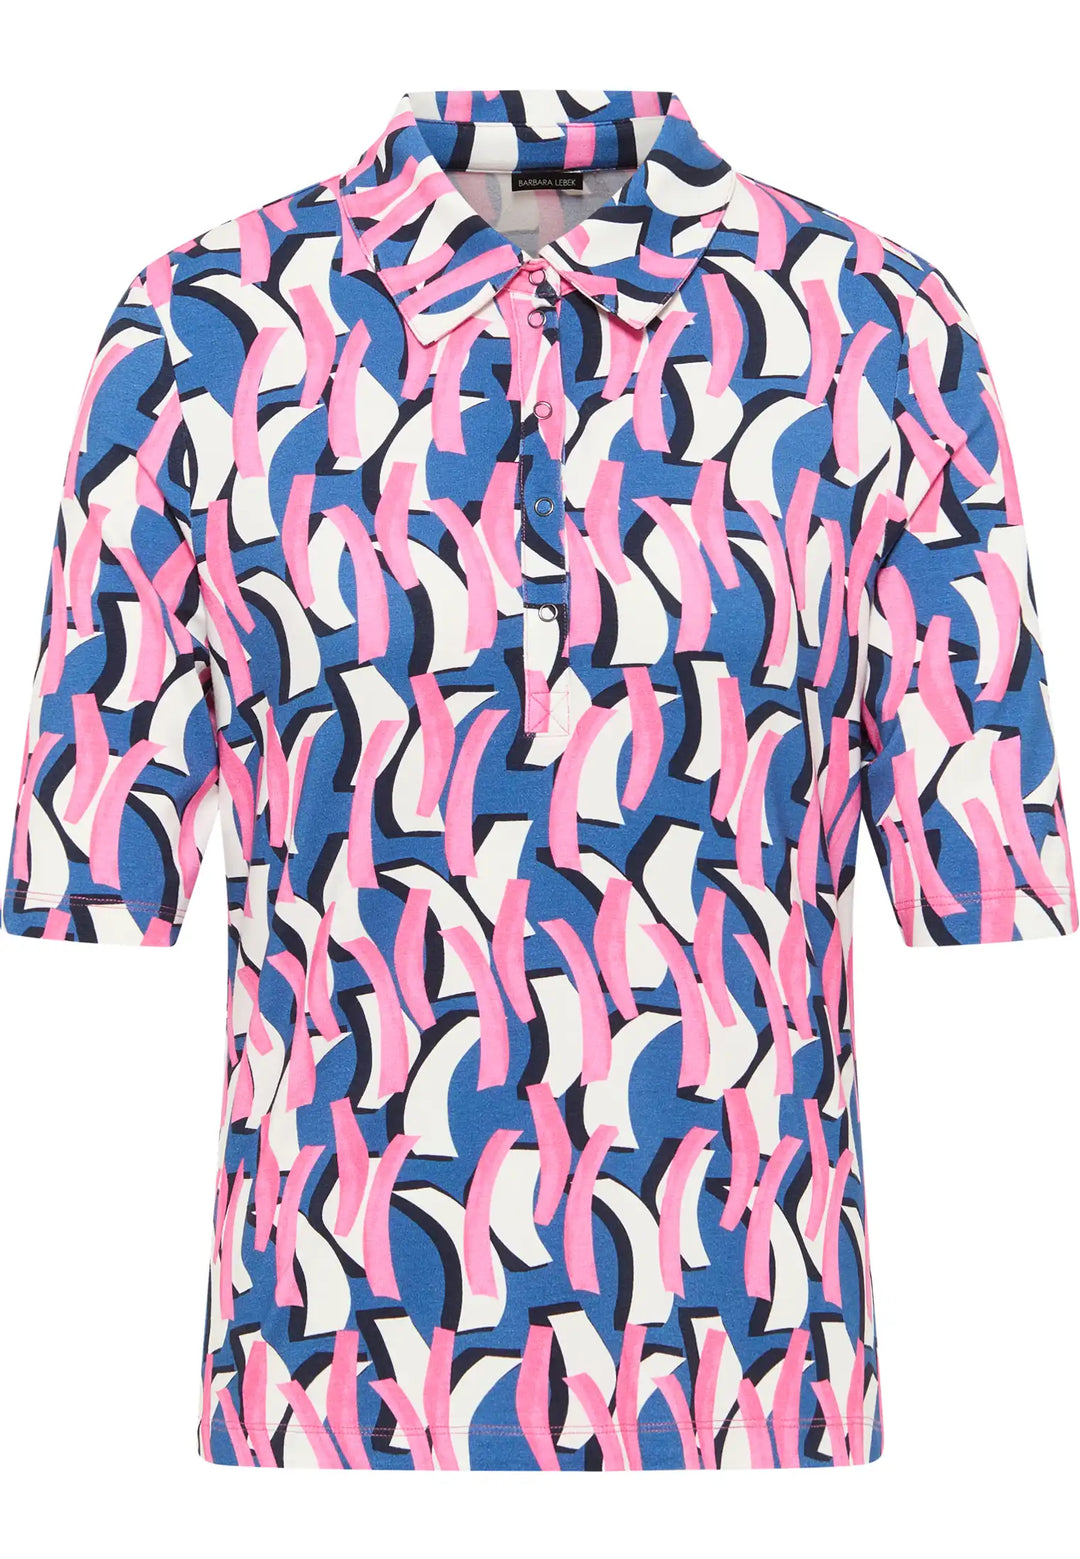 Dynamic print short-sleeve polo shirt in pink and navy on a light background, style  62010042-530